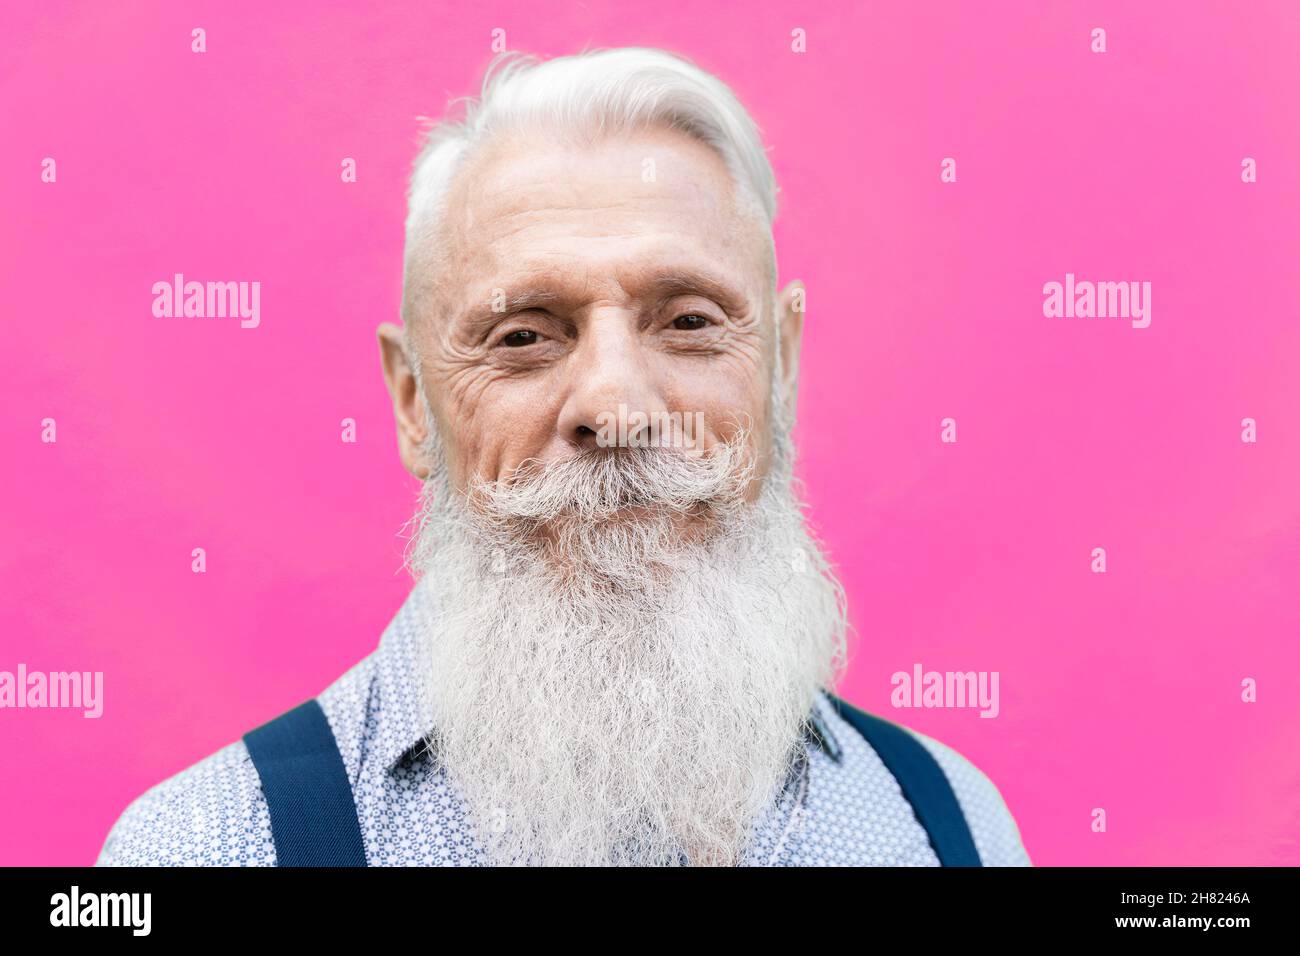 Portrait of happy hipster senior man smiling on camera - Focus in face Stock Photo